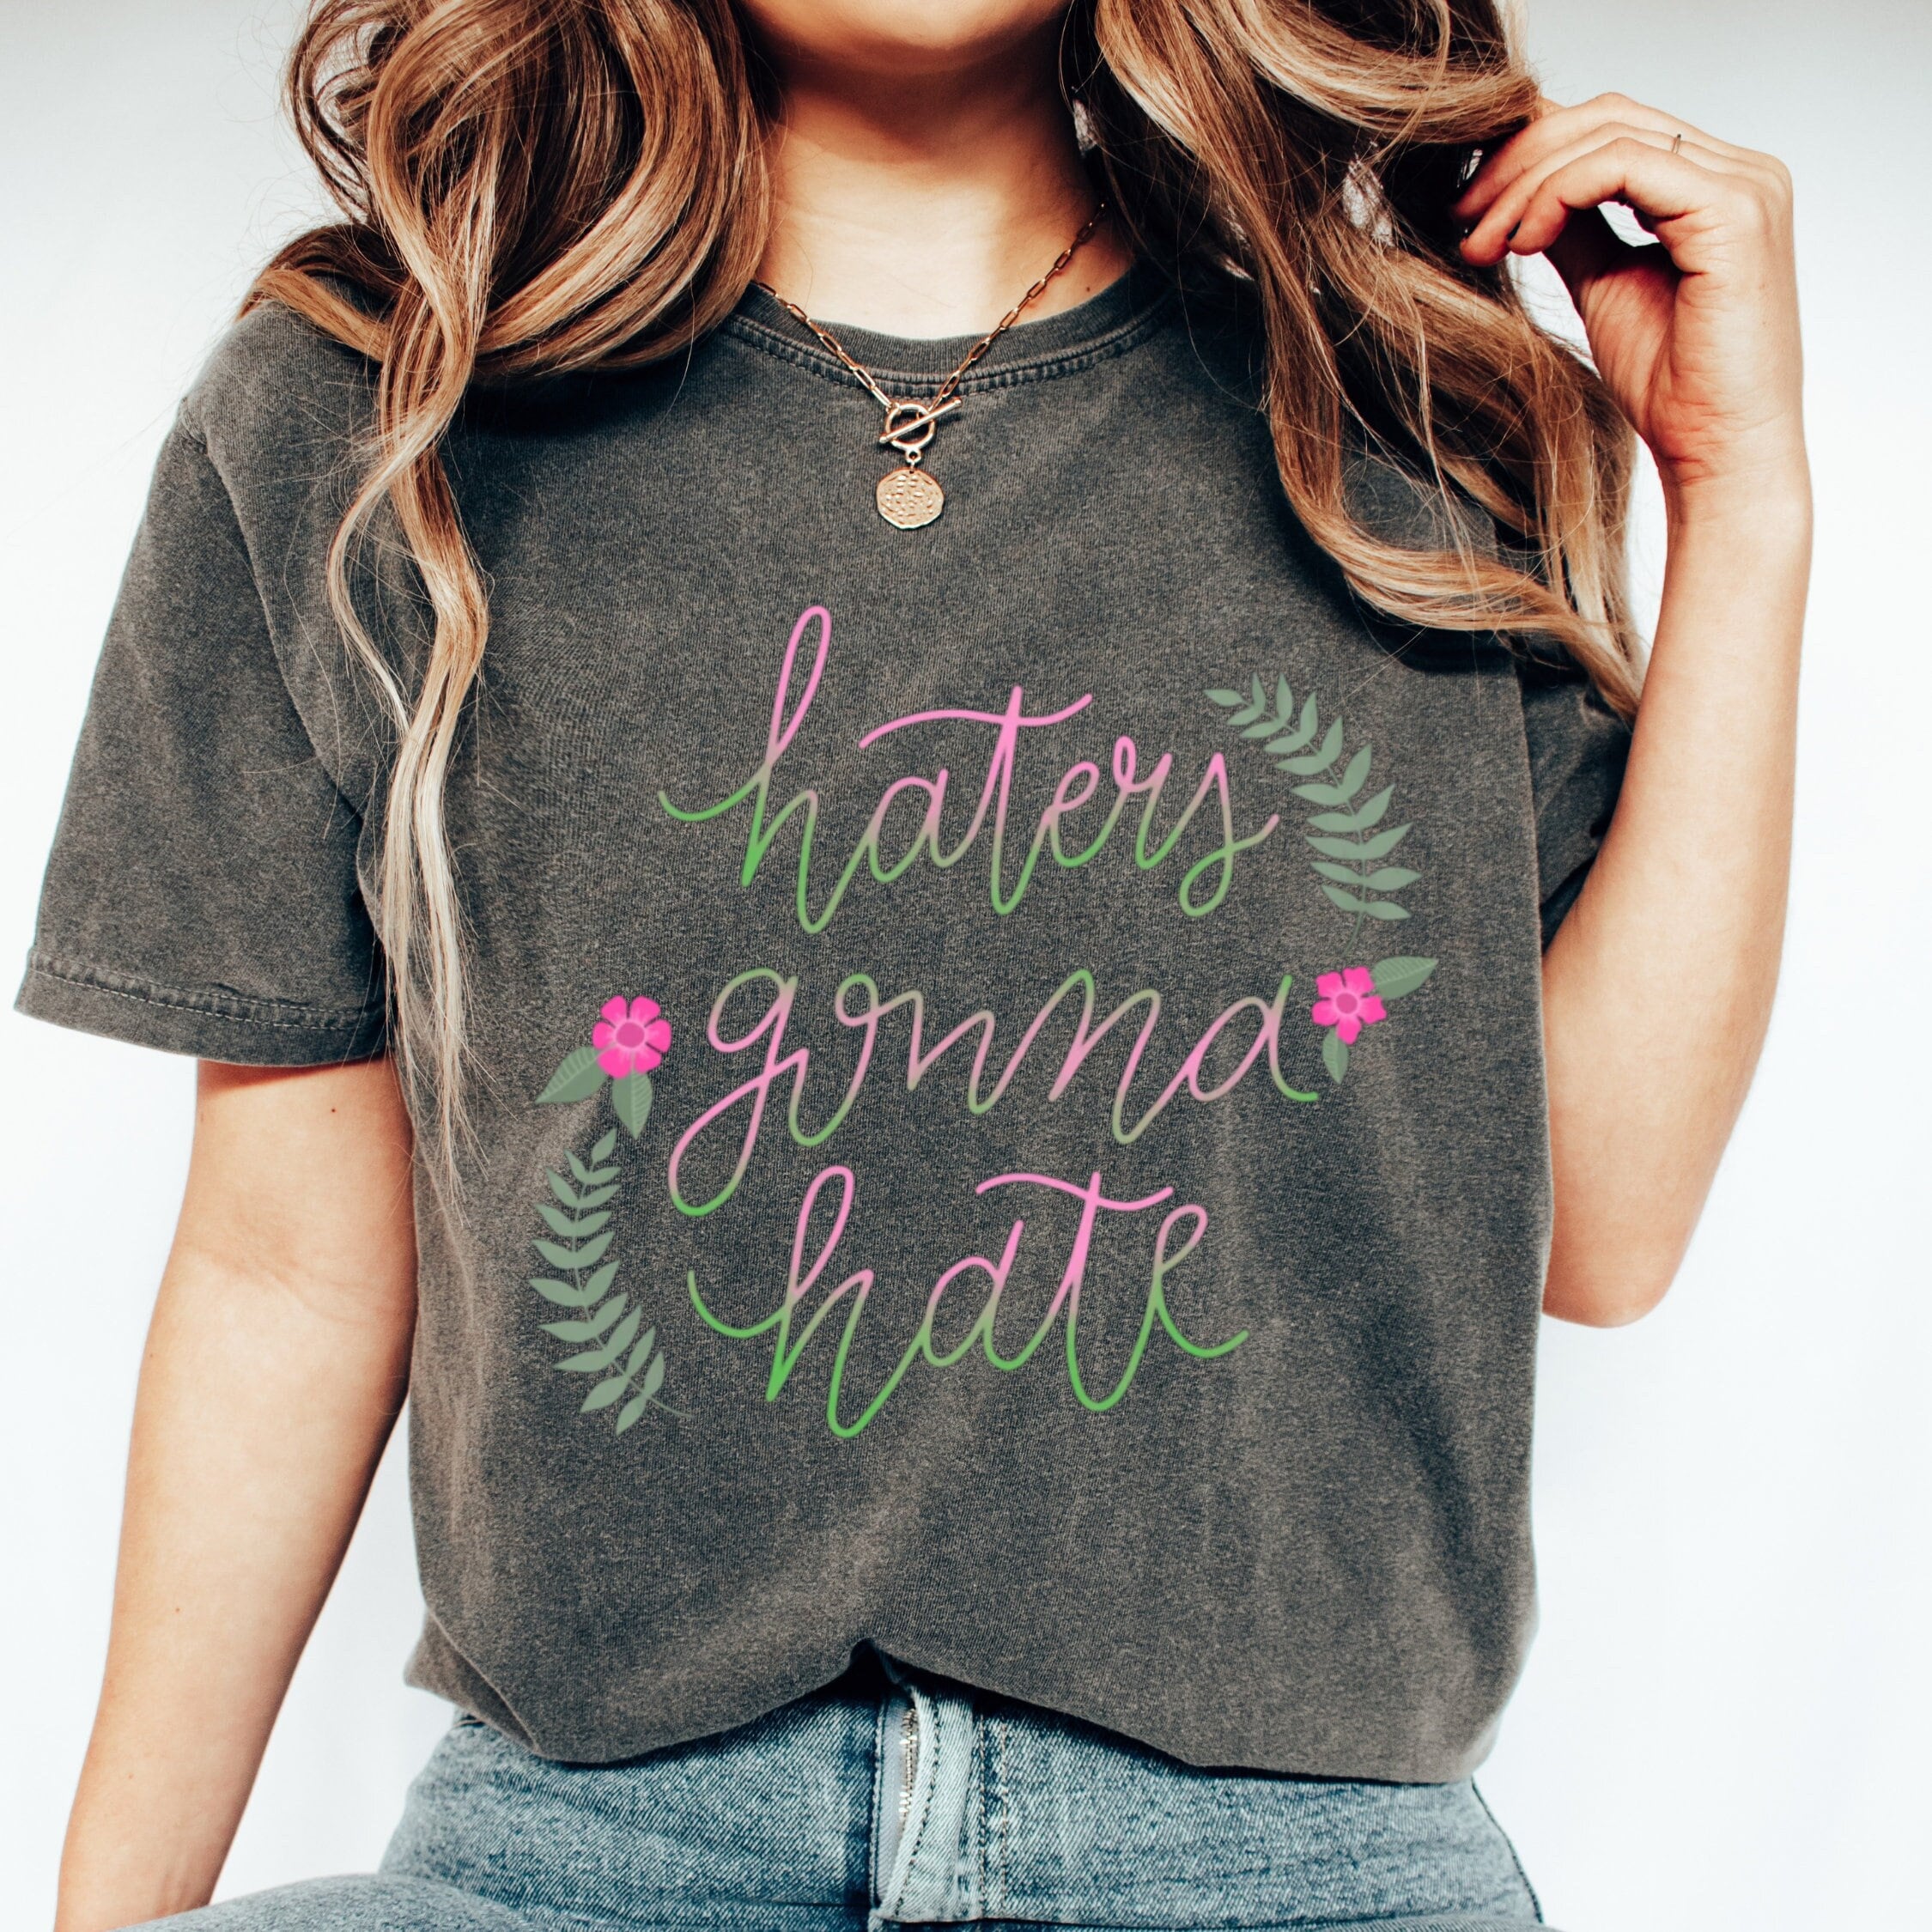 Taylor Swift Haters Gonna Hate Shirt, Comfort Colors, The Eras Tour Shirt, Taylor Swift Shirt, Taylor Swift, Taylor Swift Merch, Swiftie